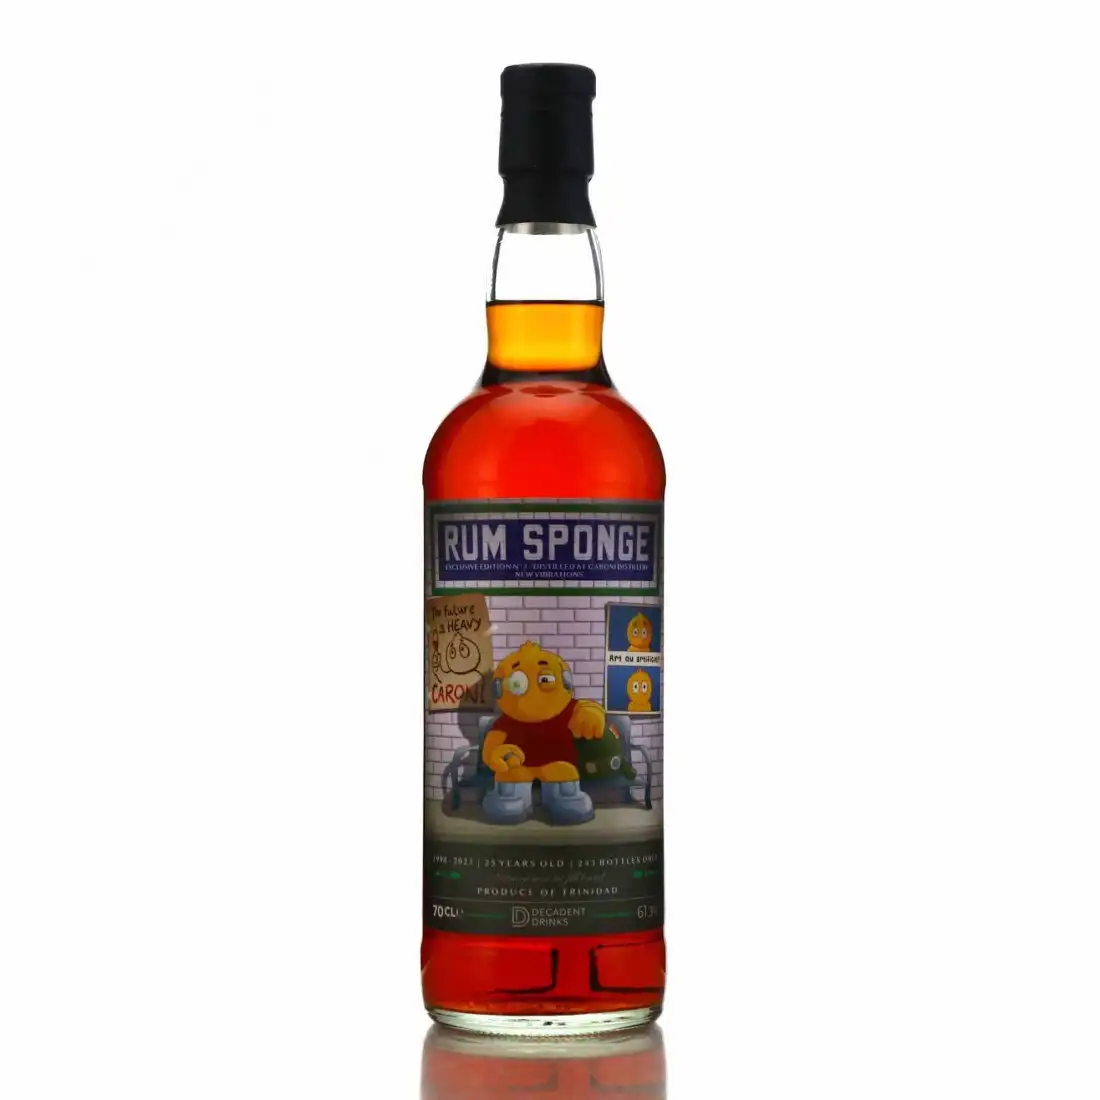 Image of the front of the bottle of the rum Rum Sponge Exclusive Edition No. 3